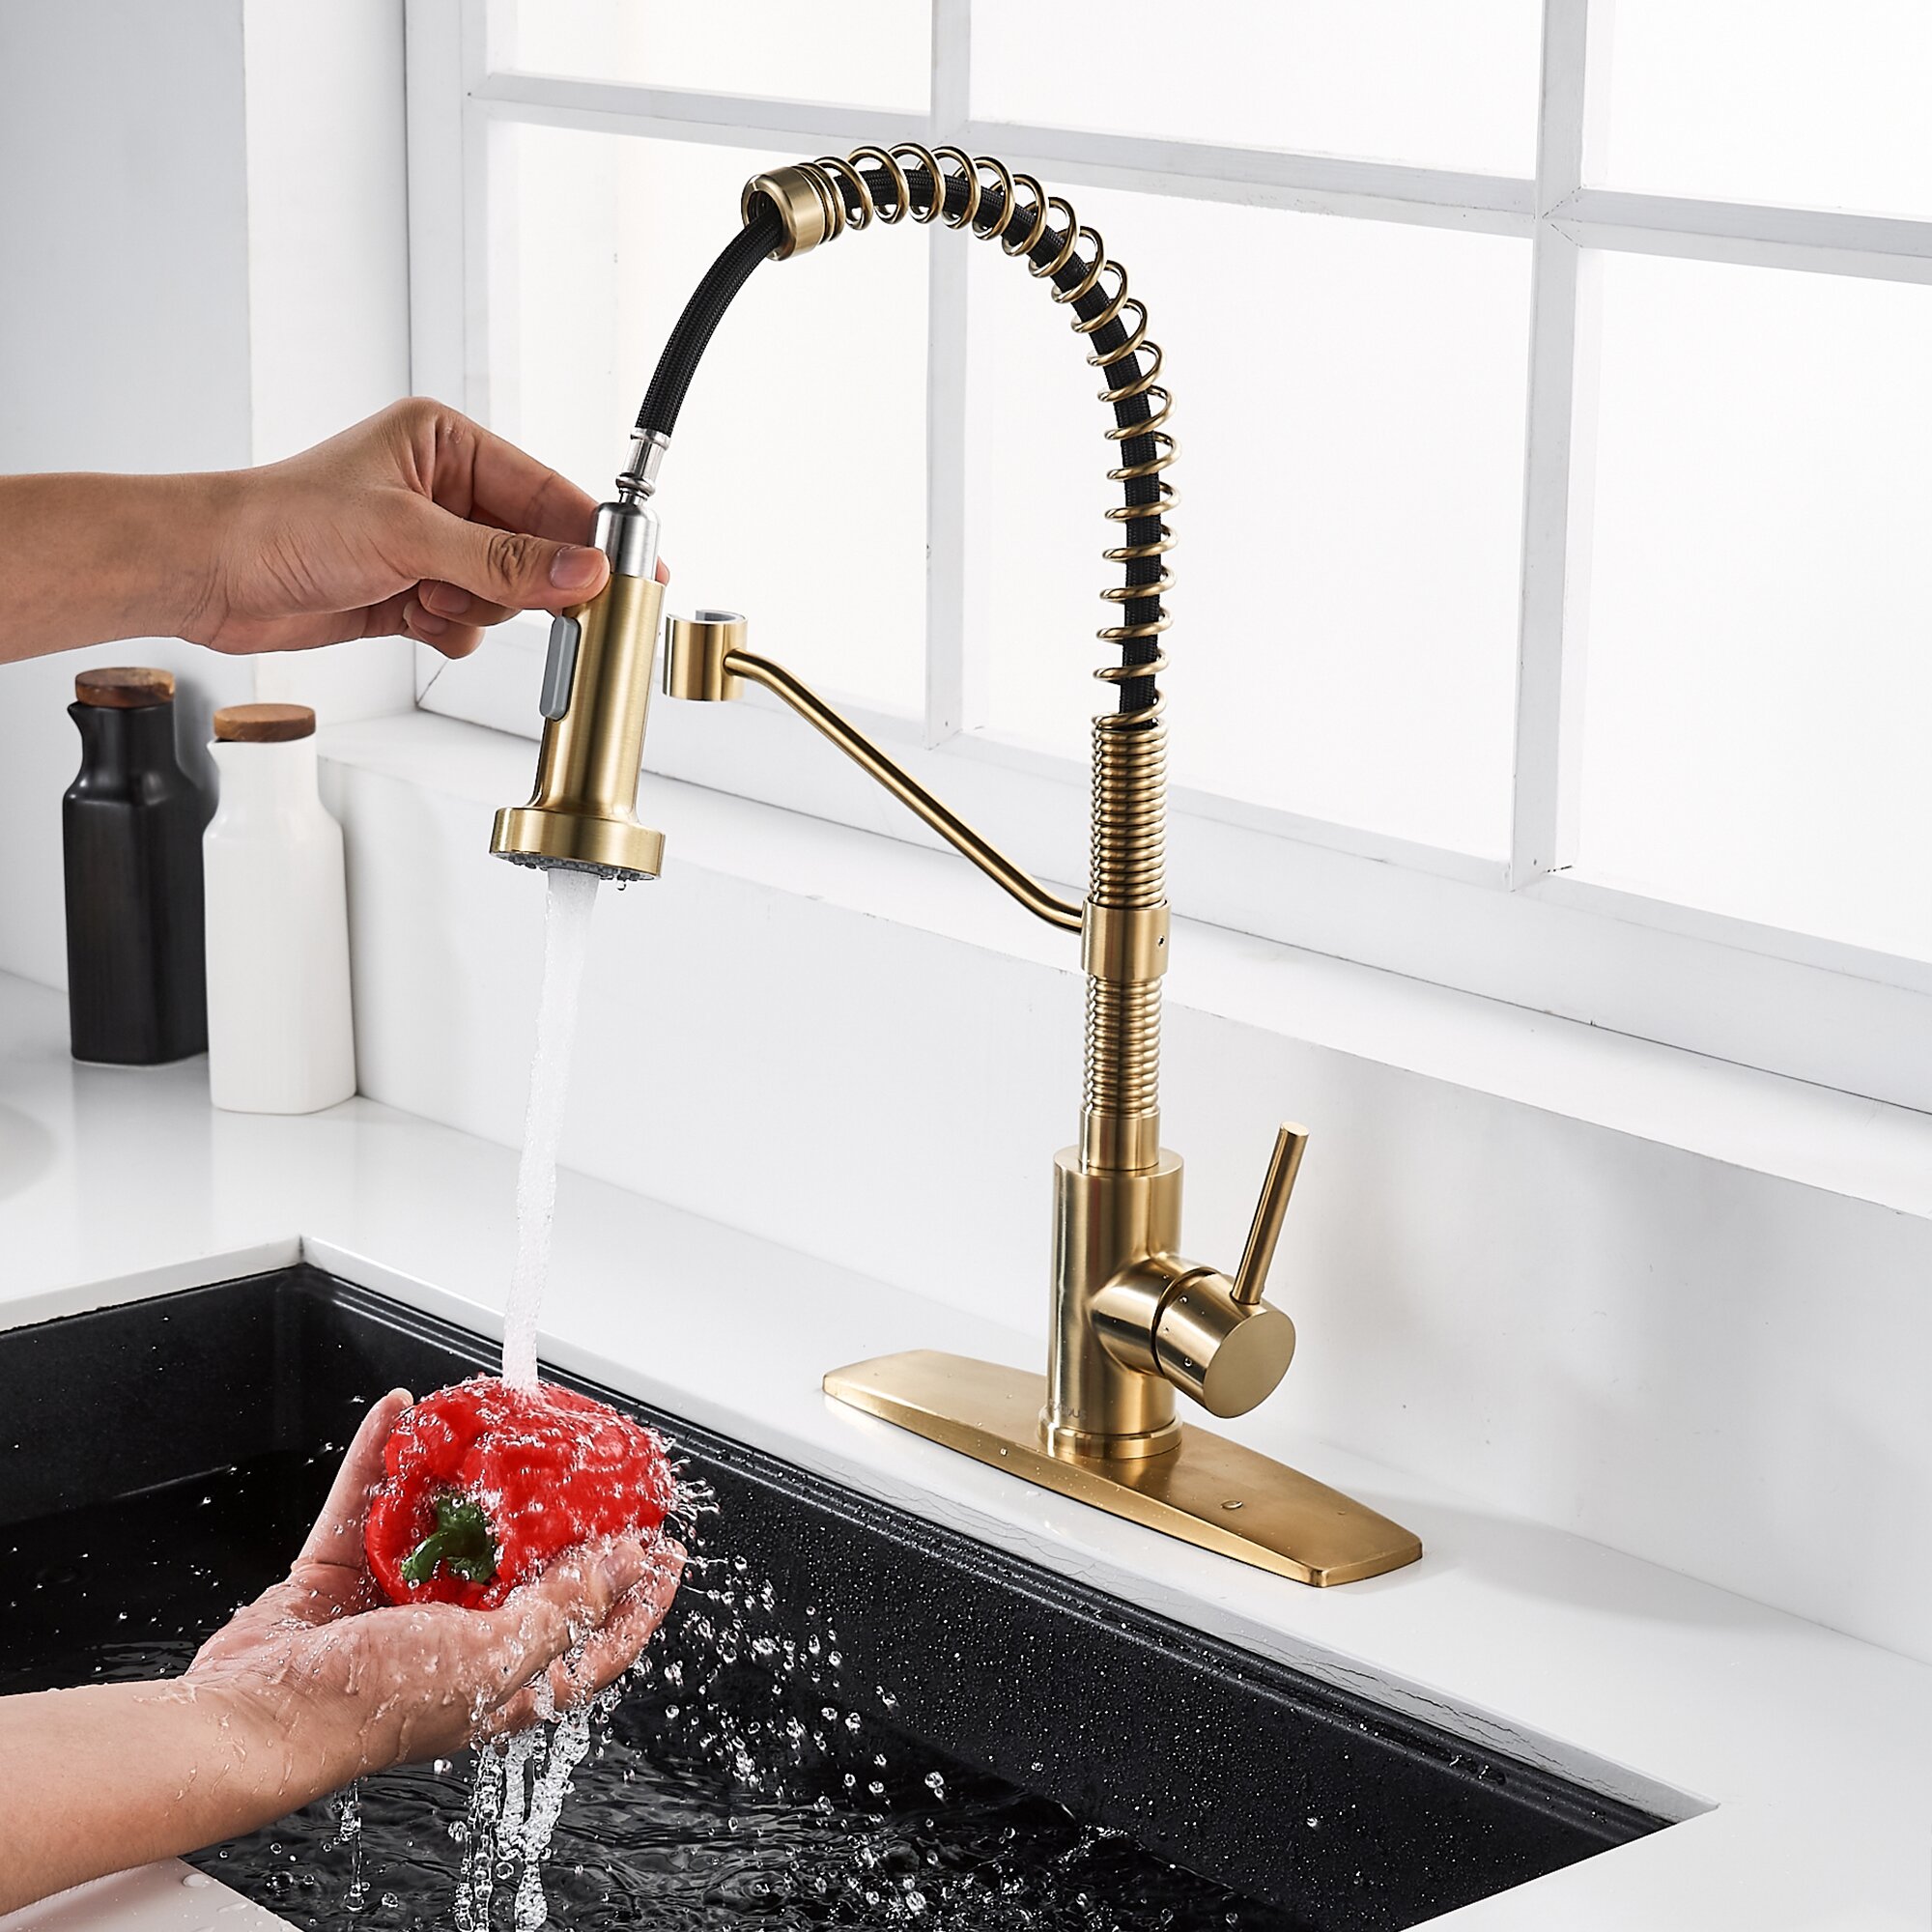 Faucet Taps Kitchen Faucet 2 Handles Black Copper Style Easy for Installation US 